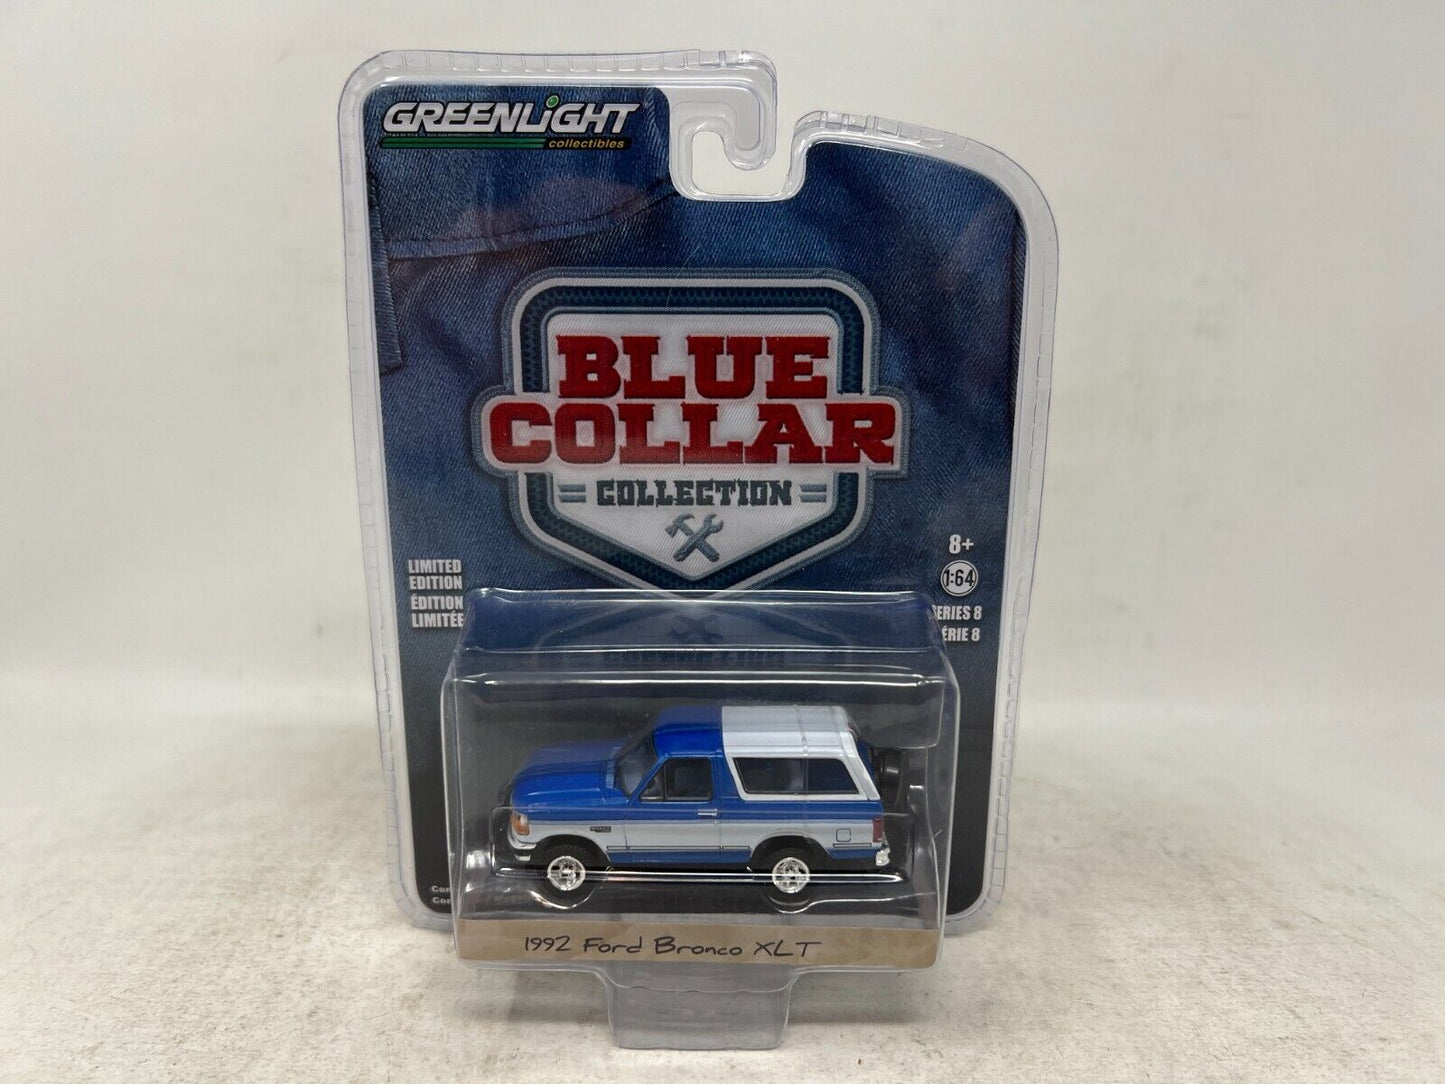 Greenlight Blue Collar Collection Series 8 1992 Ford Bronco XLT 1:64 Diecast